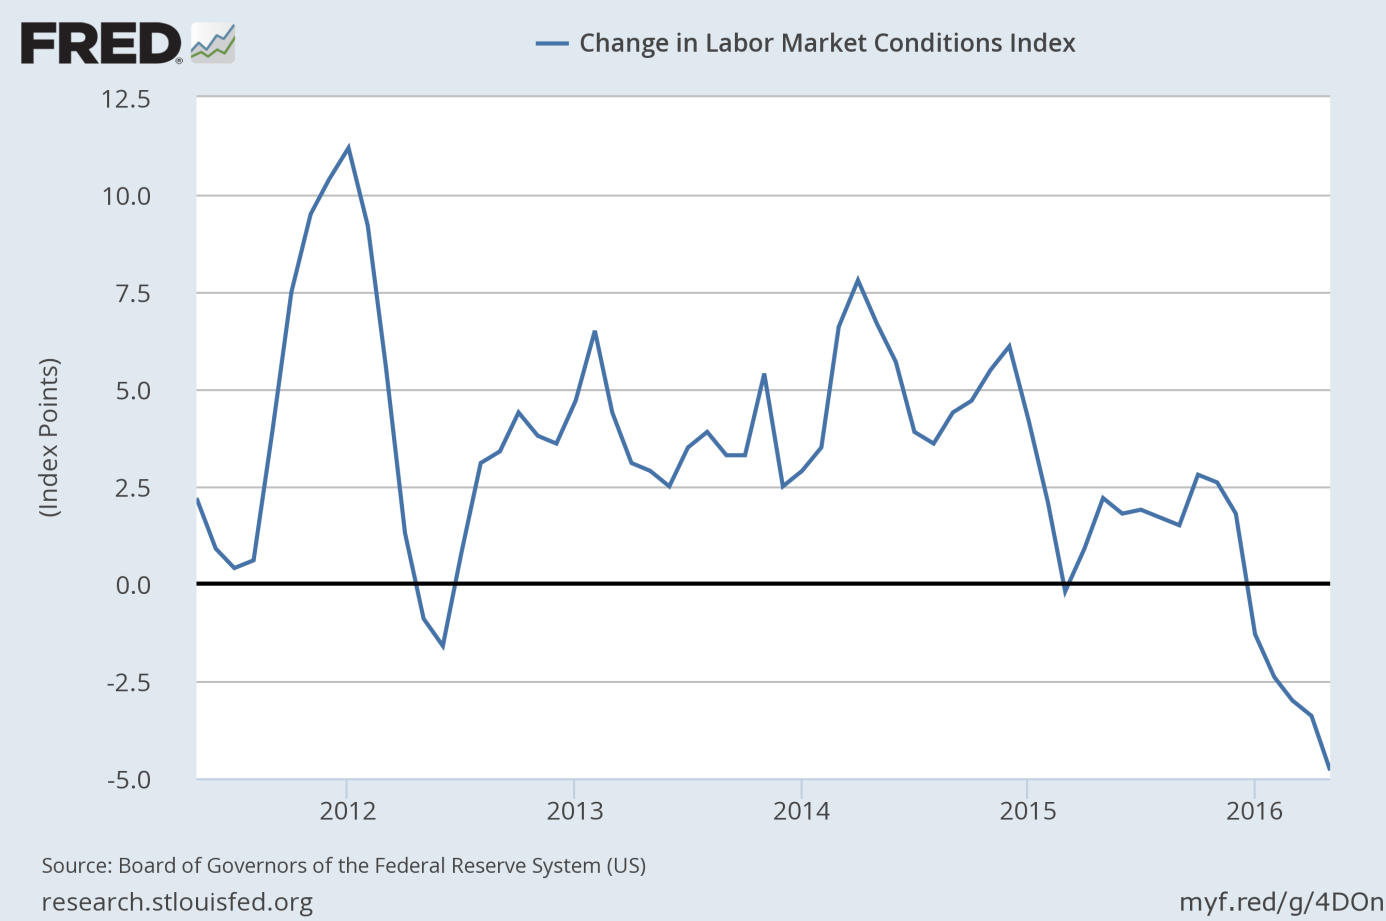 Fed’s Labor Market Conditions Index